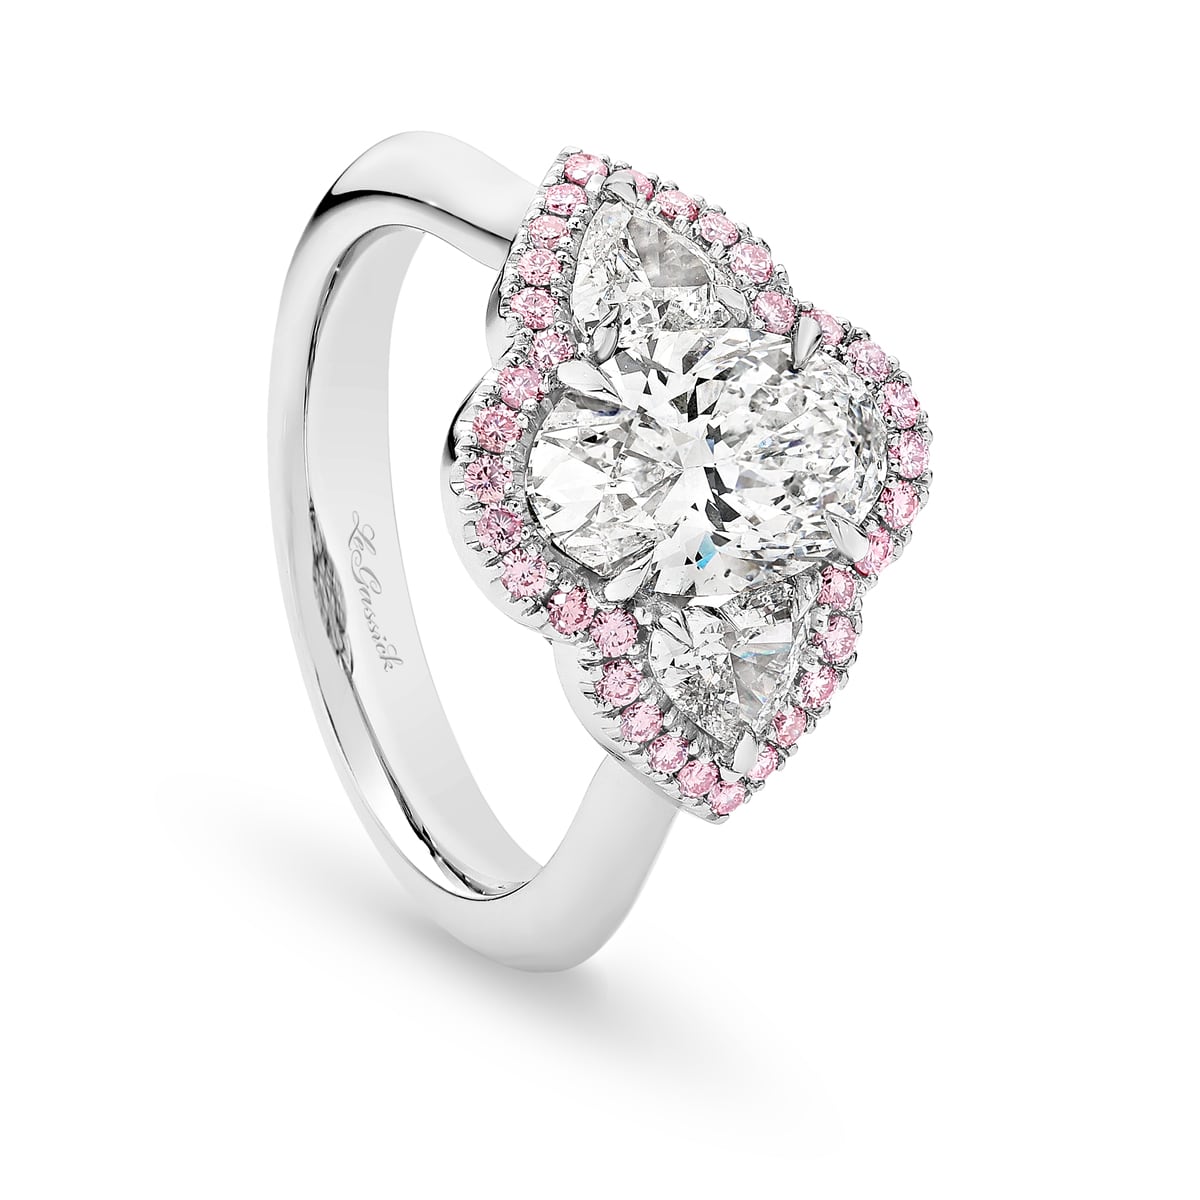 Katerina is a white & pink diamond ring with a 2 carat oval centre stone. She was designed and handcrafted by LeGassick's Master Jewellers, Gold Coast, Australia.